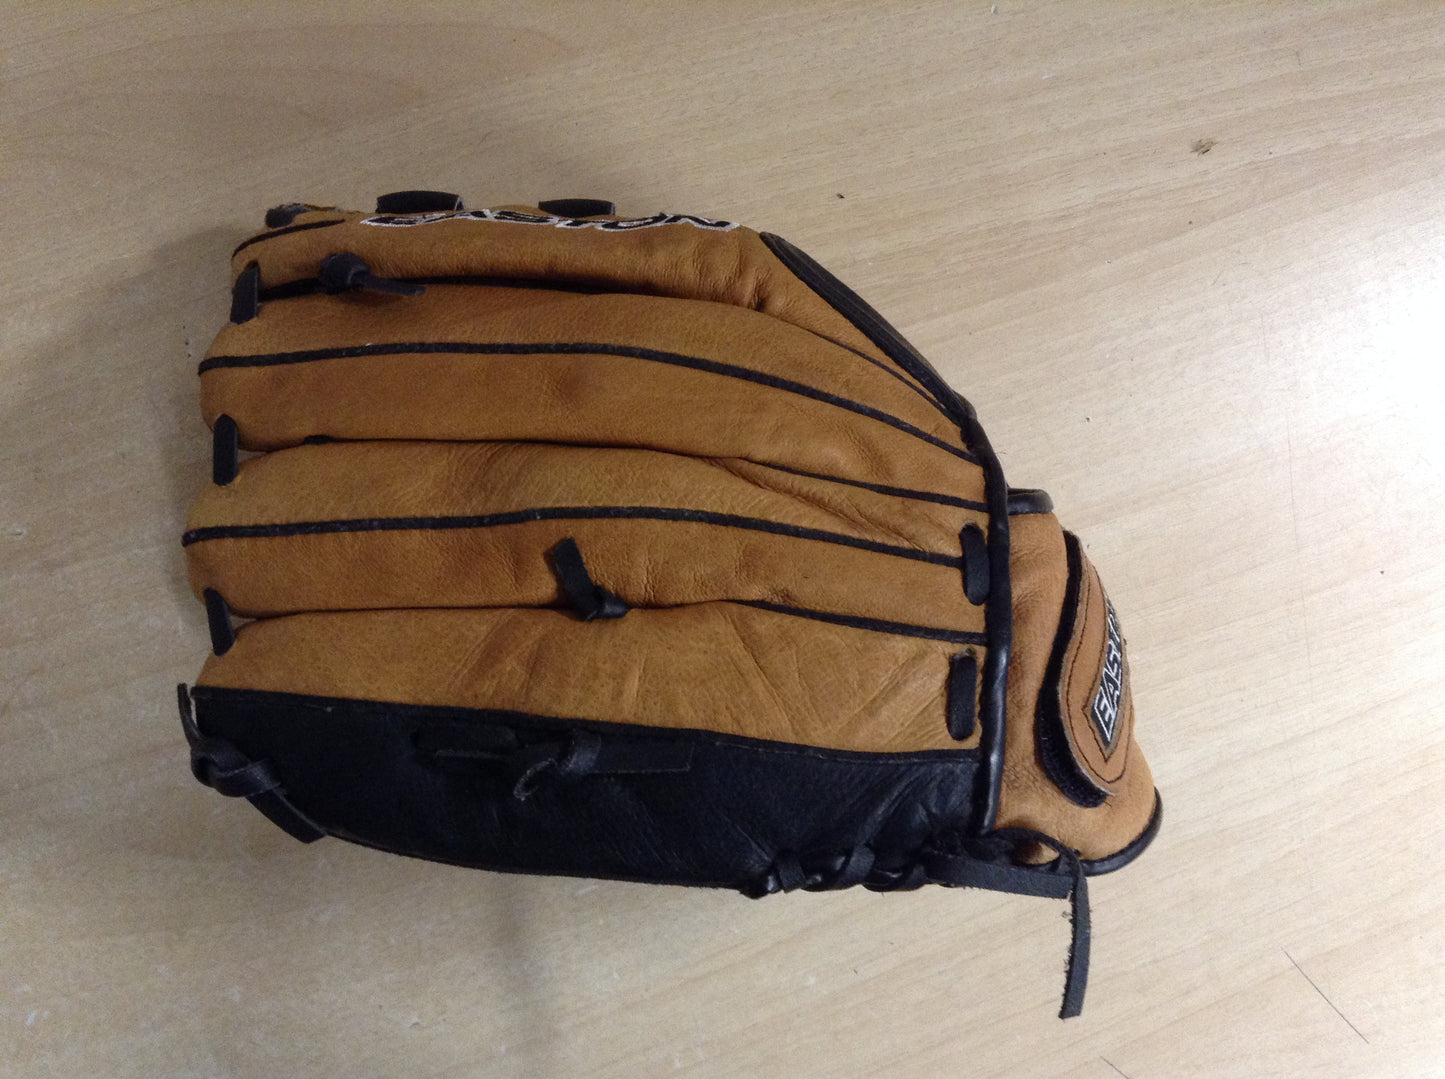 Baseball Glove Adult Size 12 inch Easton Phenom Brown Black Leather Fits on Left Hand As New